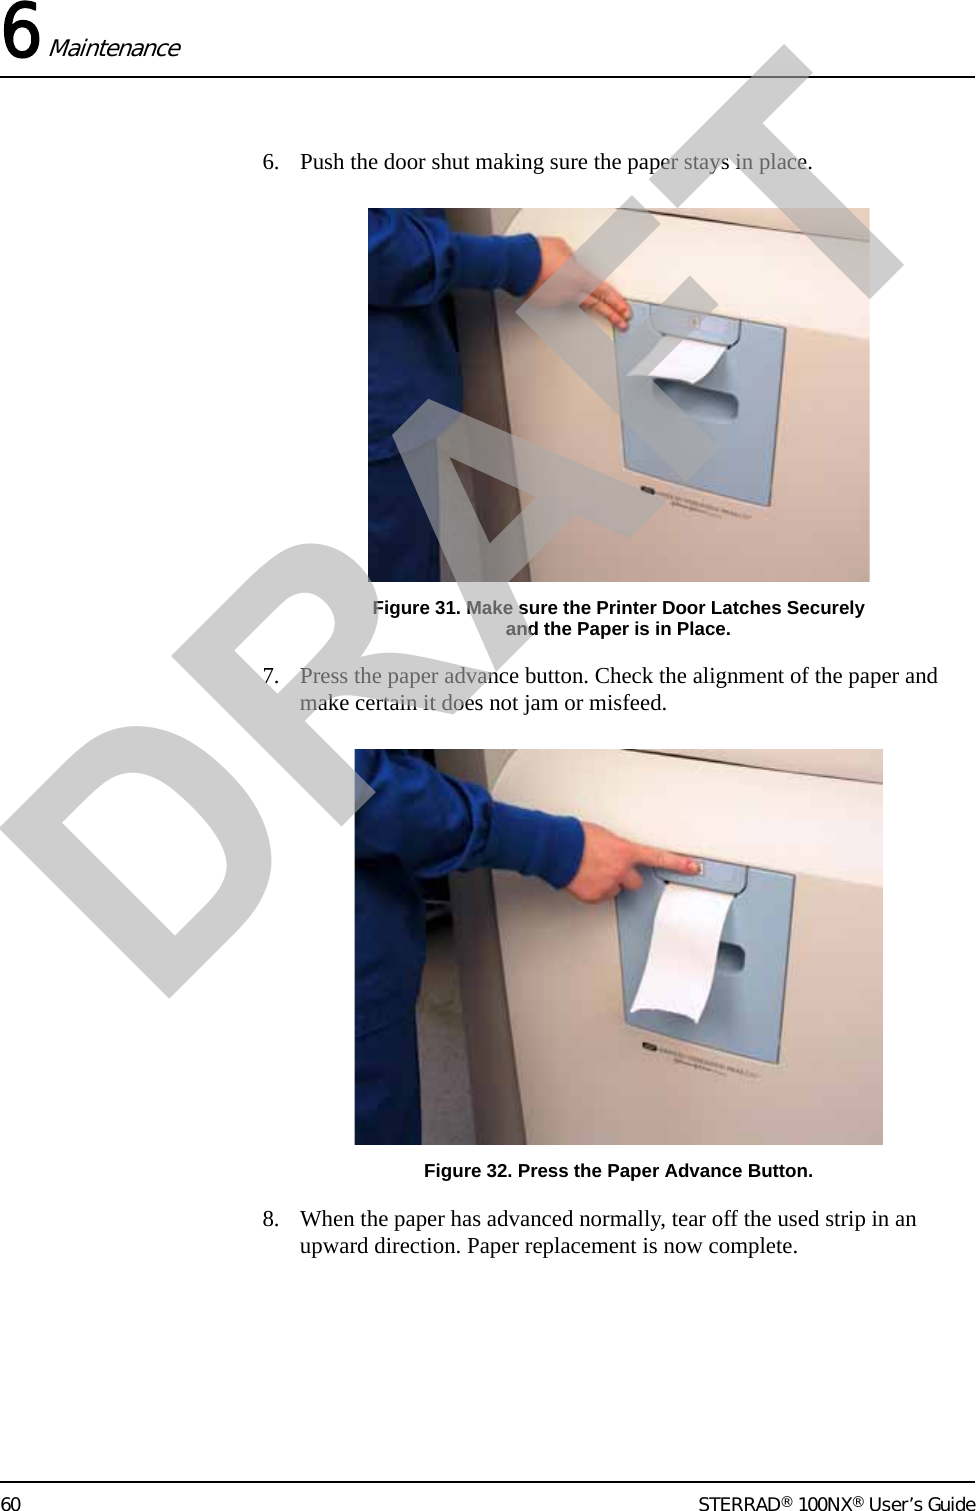 6 Maintenance60 STERRAD® 100NX® User’s Guide6. Push the door shut making sure the paper stays in place.Figure 31. Make sure the Printer Door Latches Securely and the Paper is in Place.7. Press the paper advance button. Check the alignment of the paper and make certain it does not jam or misfeed.Figure 32. Press the Paper Advance Button.8. When the paper has advanced normally, tear off the used strip in an upward direction. Paper replacement is now complete.DRAFT